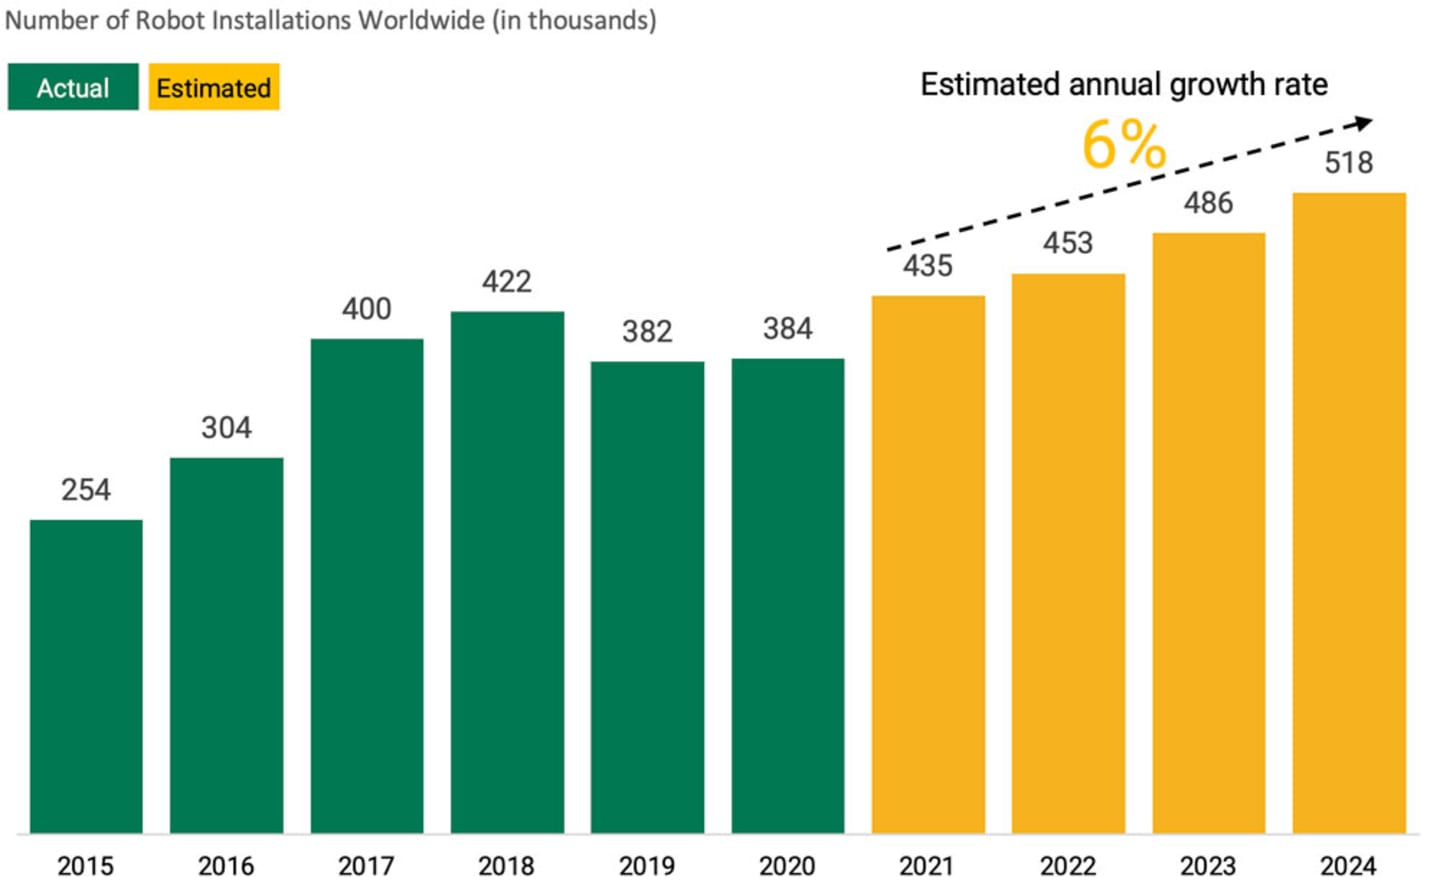 This chart shows how many robots were installed in industrial facilities worldwide from 2015 to 2020 and the projected 6% annual growth rate in these installations through 2024 when the International Federation of Robotics expects 518,000 units globally. 